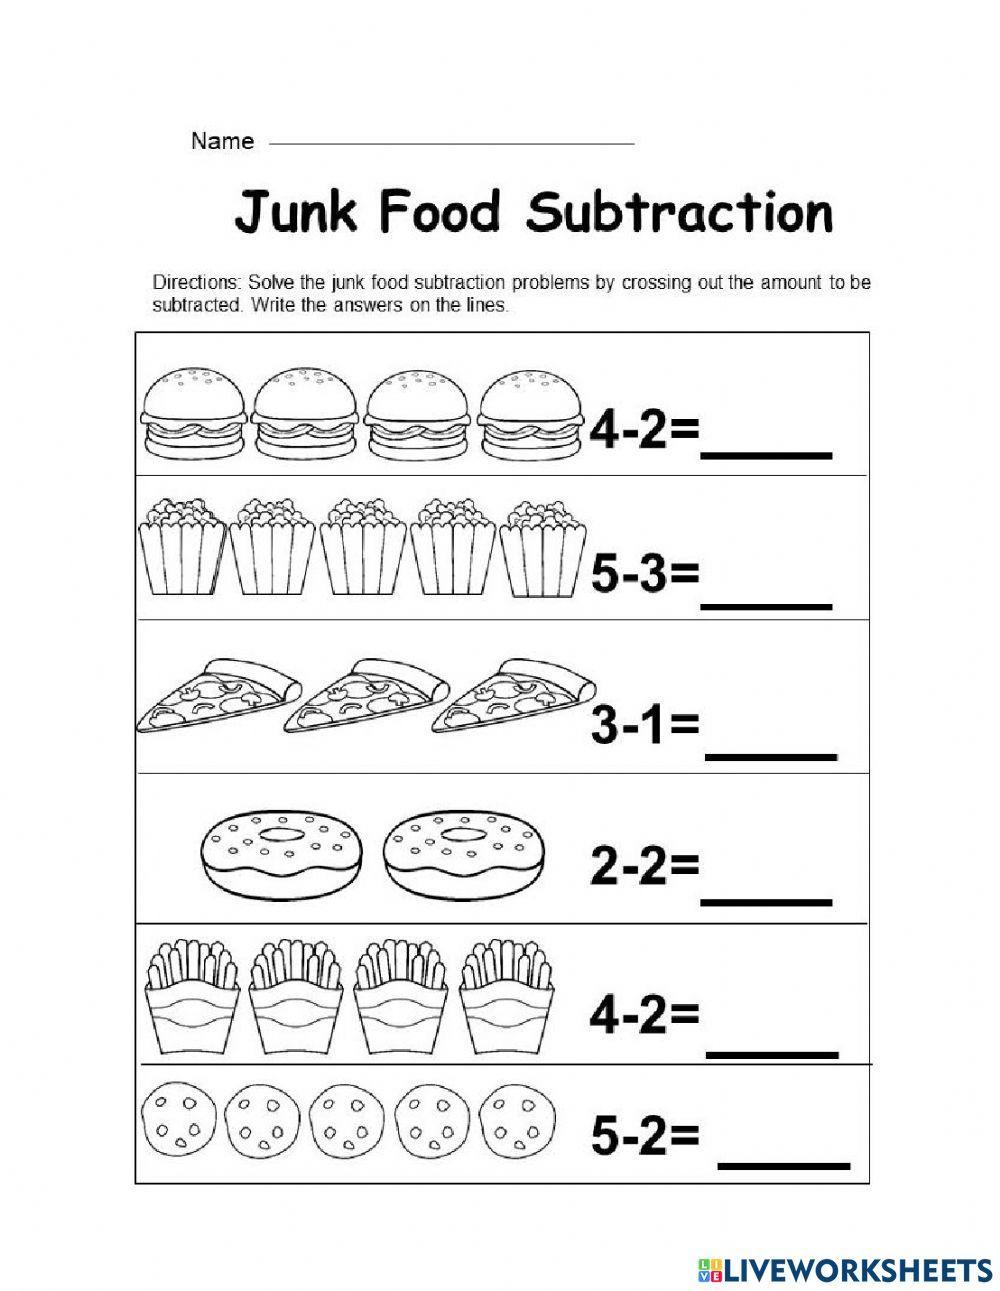 Subtraction with pictures